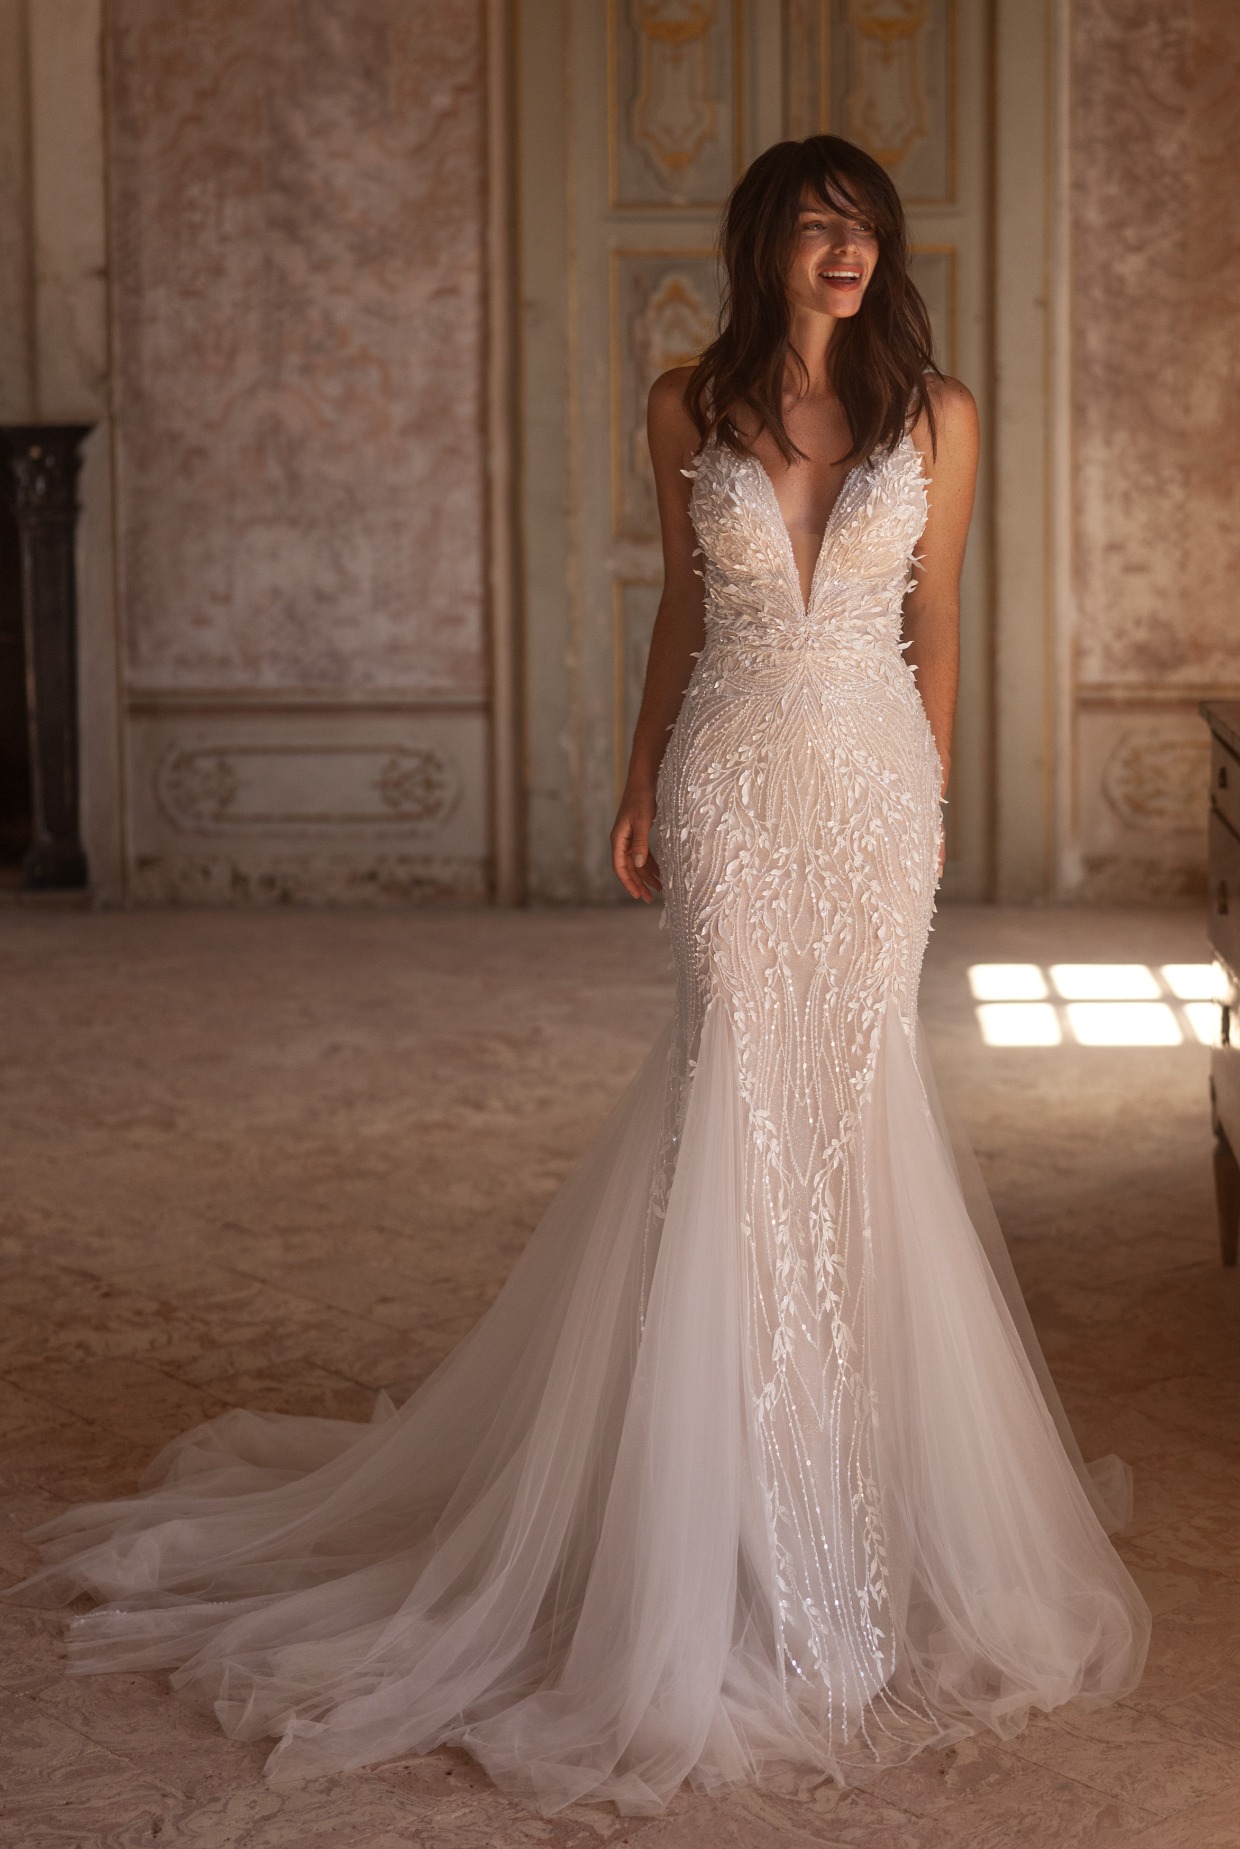 beaded lace wedding dress with plunging neckline from Yedyna